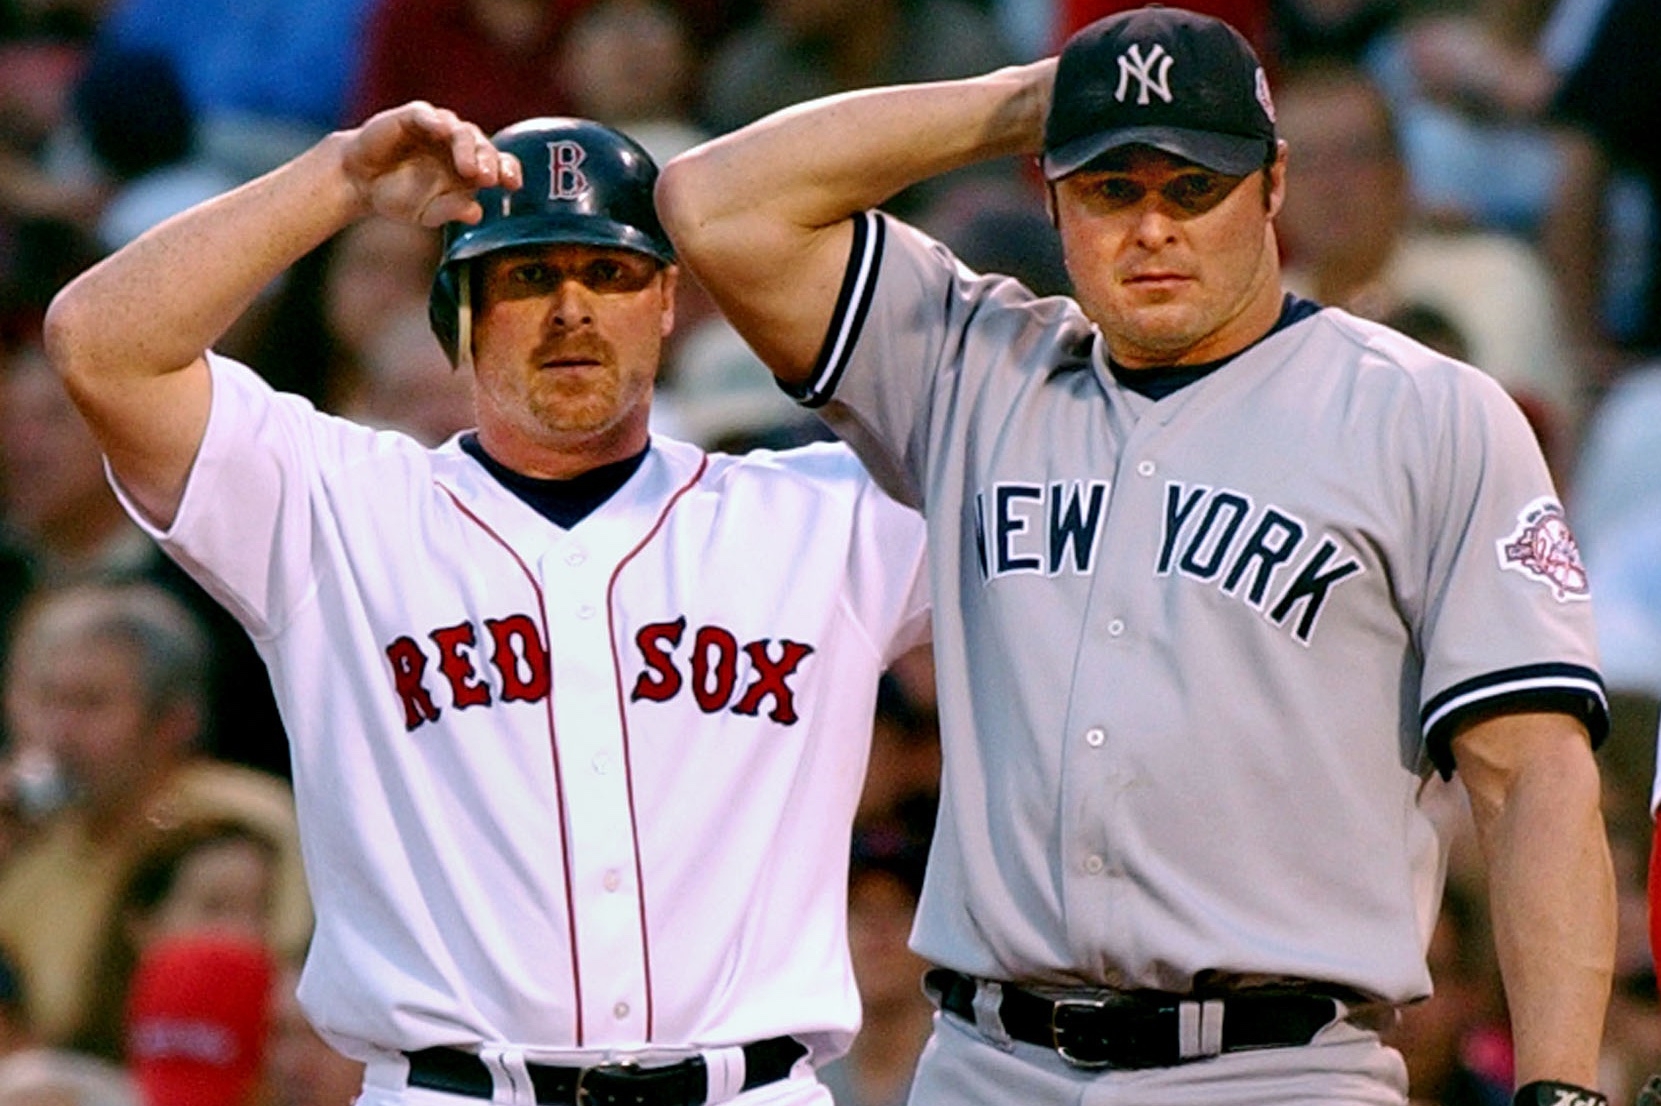 Jeremy Giambi, younger brother of Jason Giambi, dies at 47